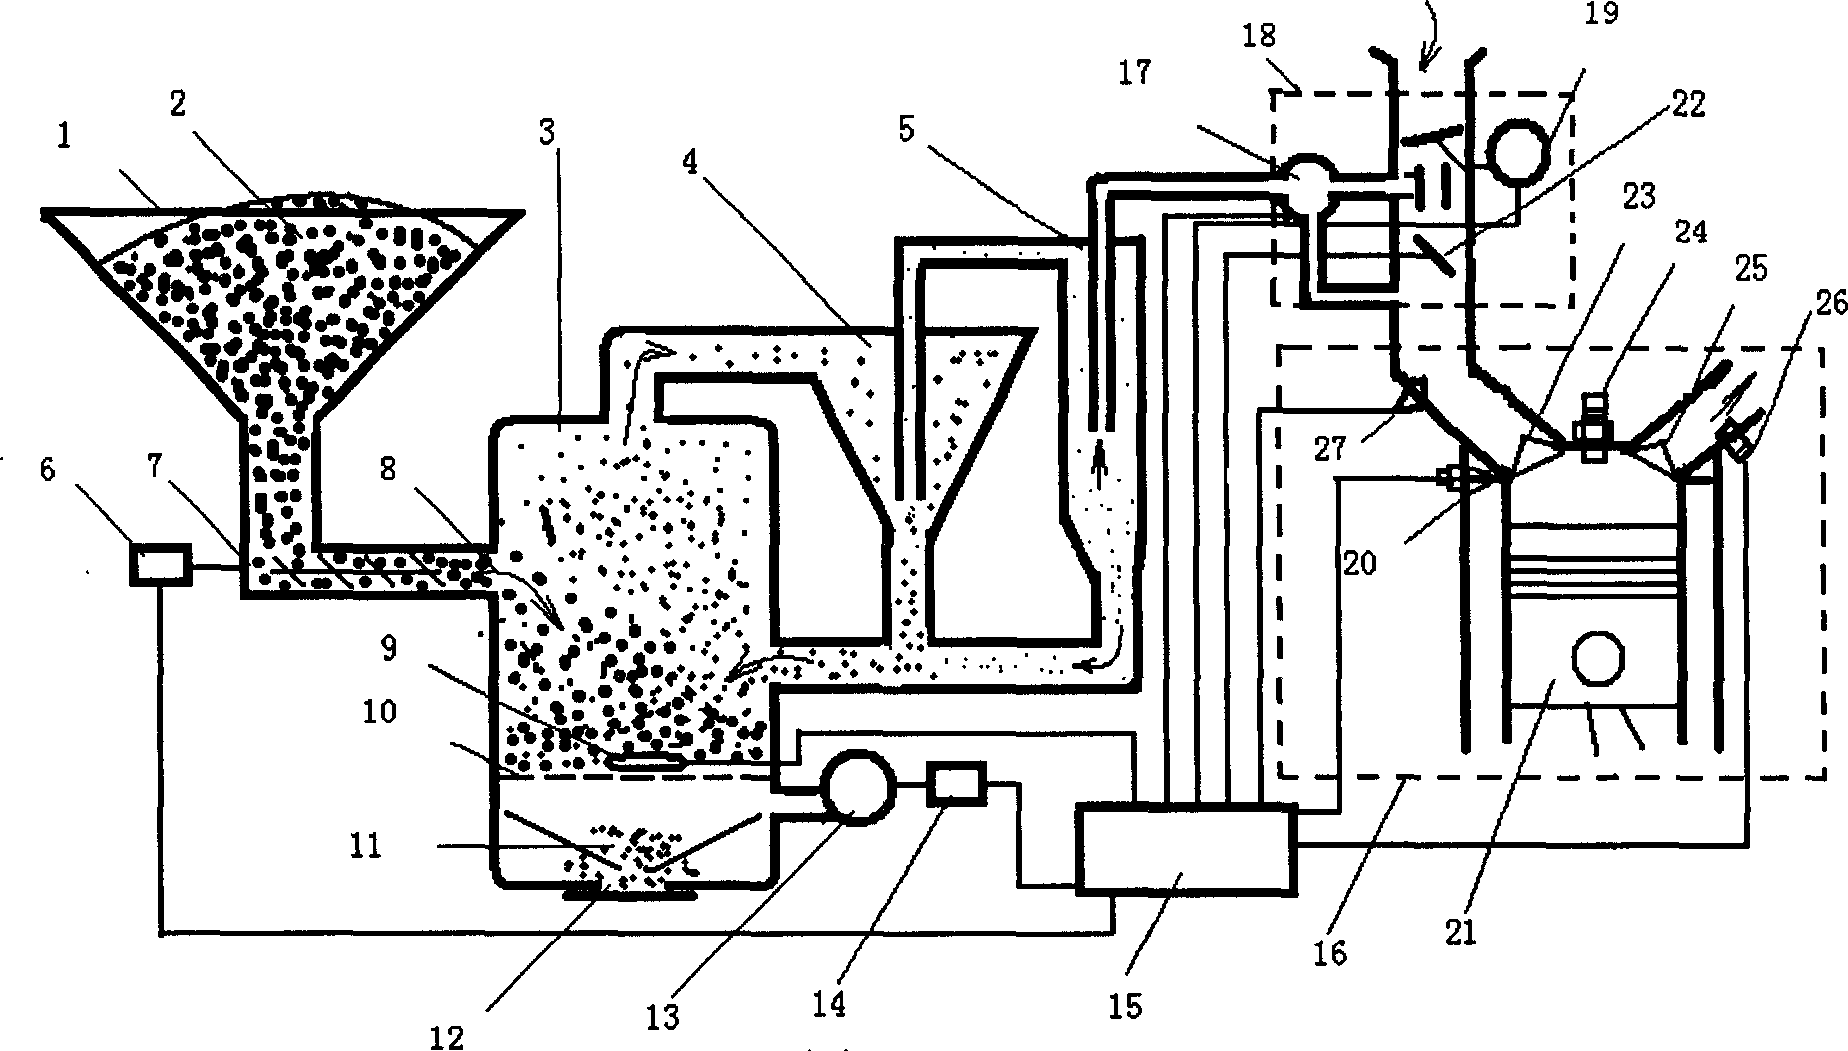 Internal-combustion engine of combustible powder